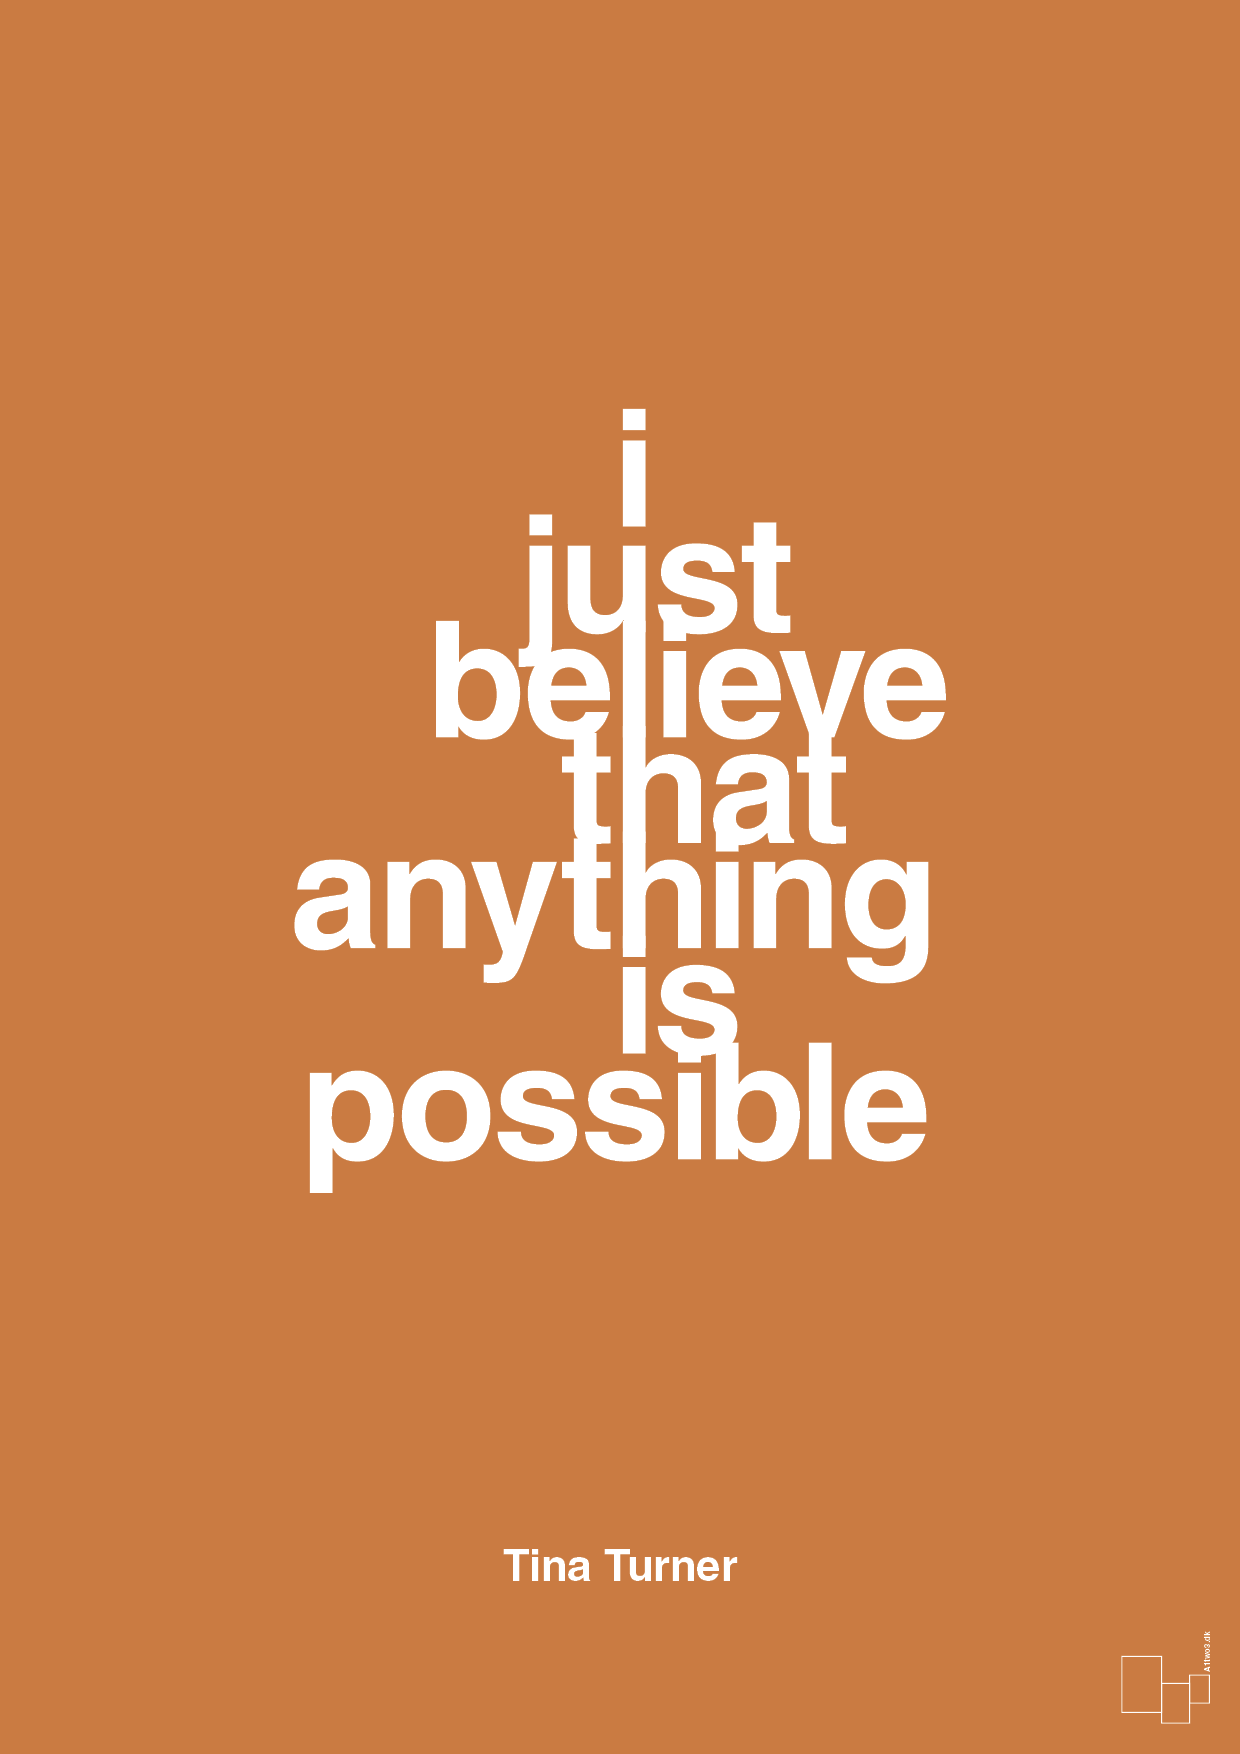 i just believe that anything is possible - Plakat med Citater i Rumba Orange